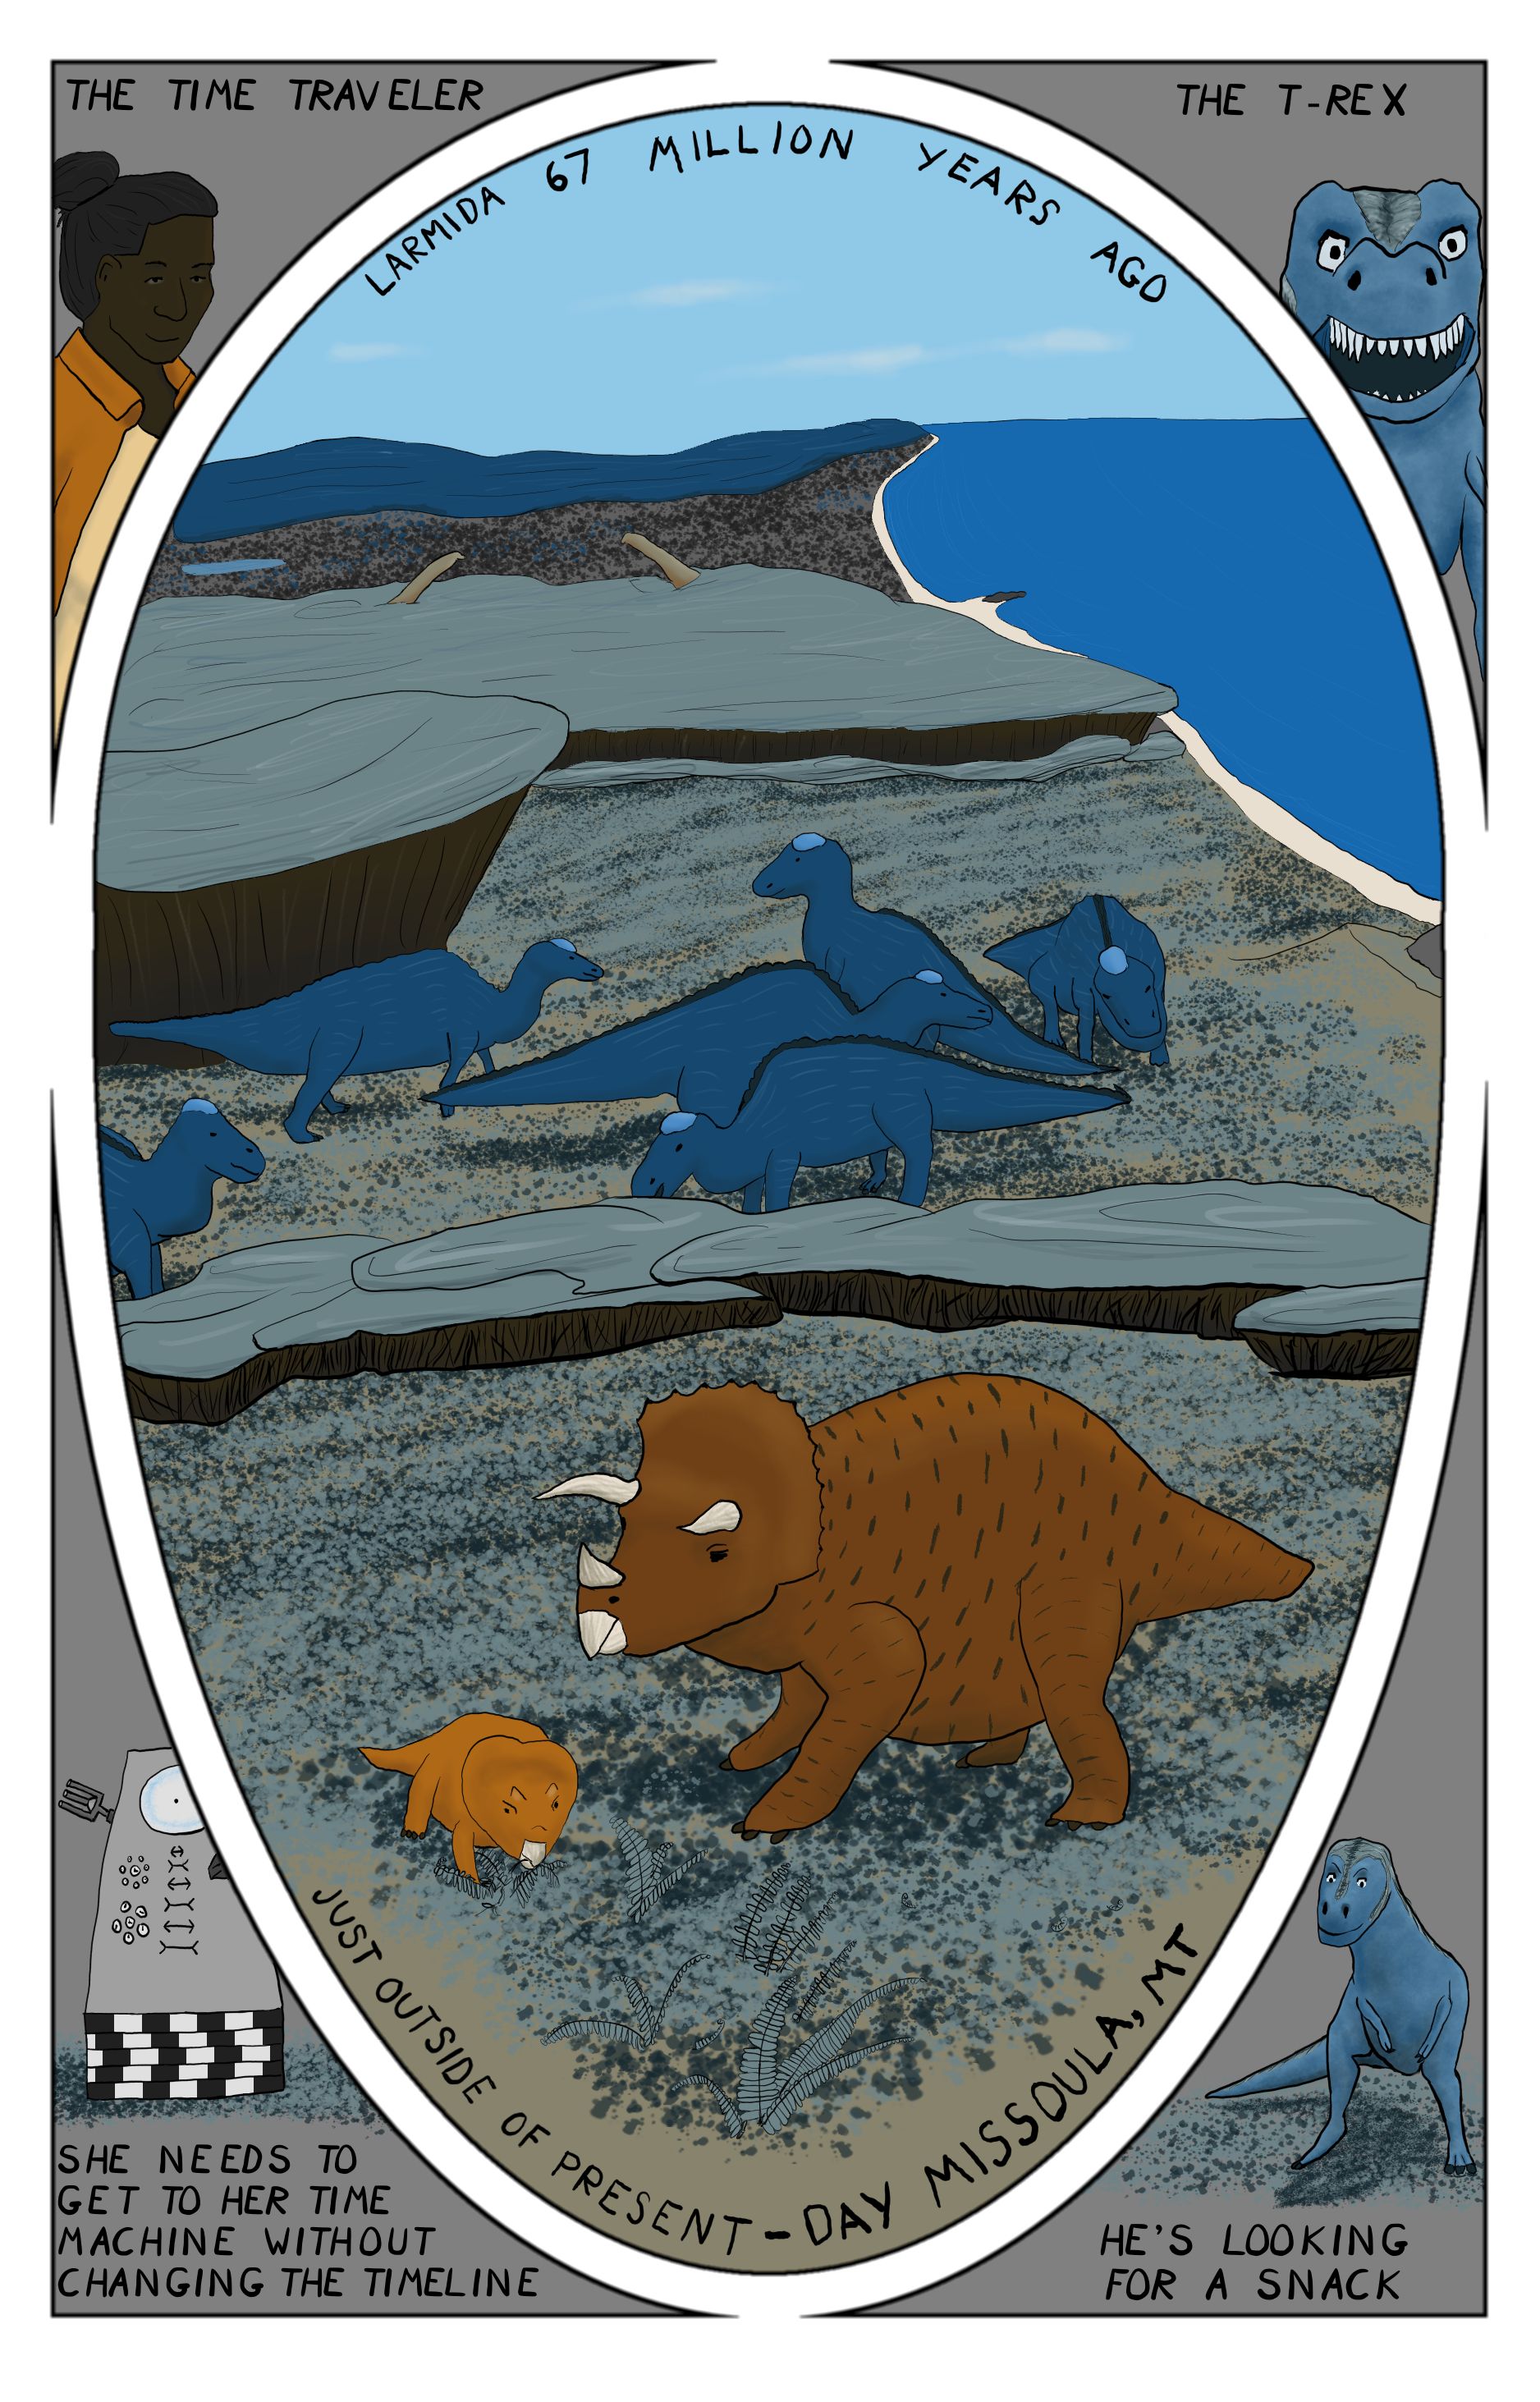 A comic featuring a time traveler and her time machine framing a scene from Loramida 67 million years ago with a Tyrannosauruses Rex framing the other side. The scene includes several dinosaur species, Triceratops, Endmondasorous, and Alamosauraous.